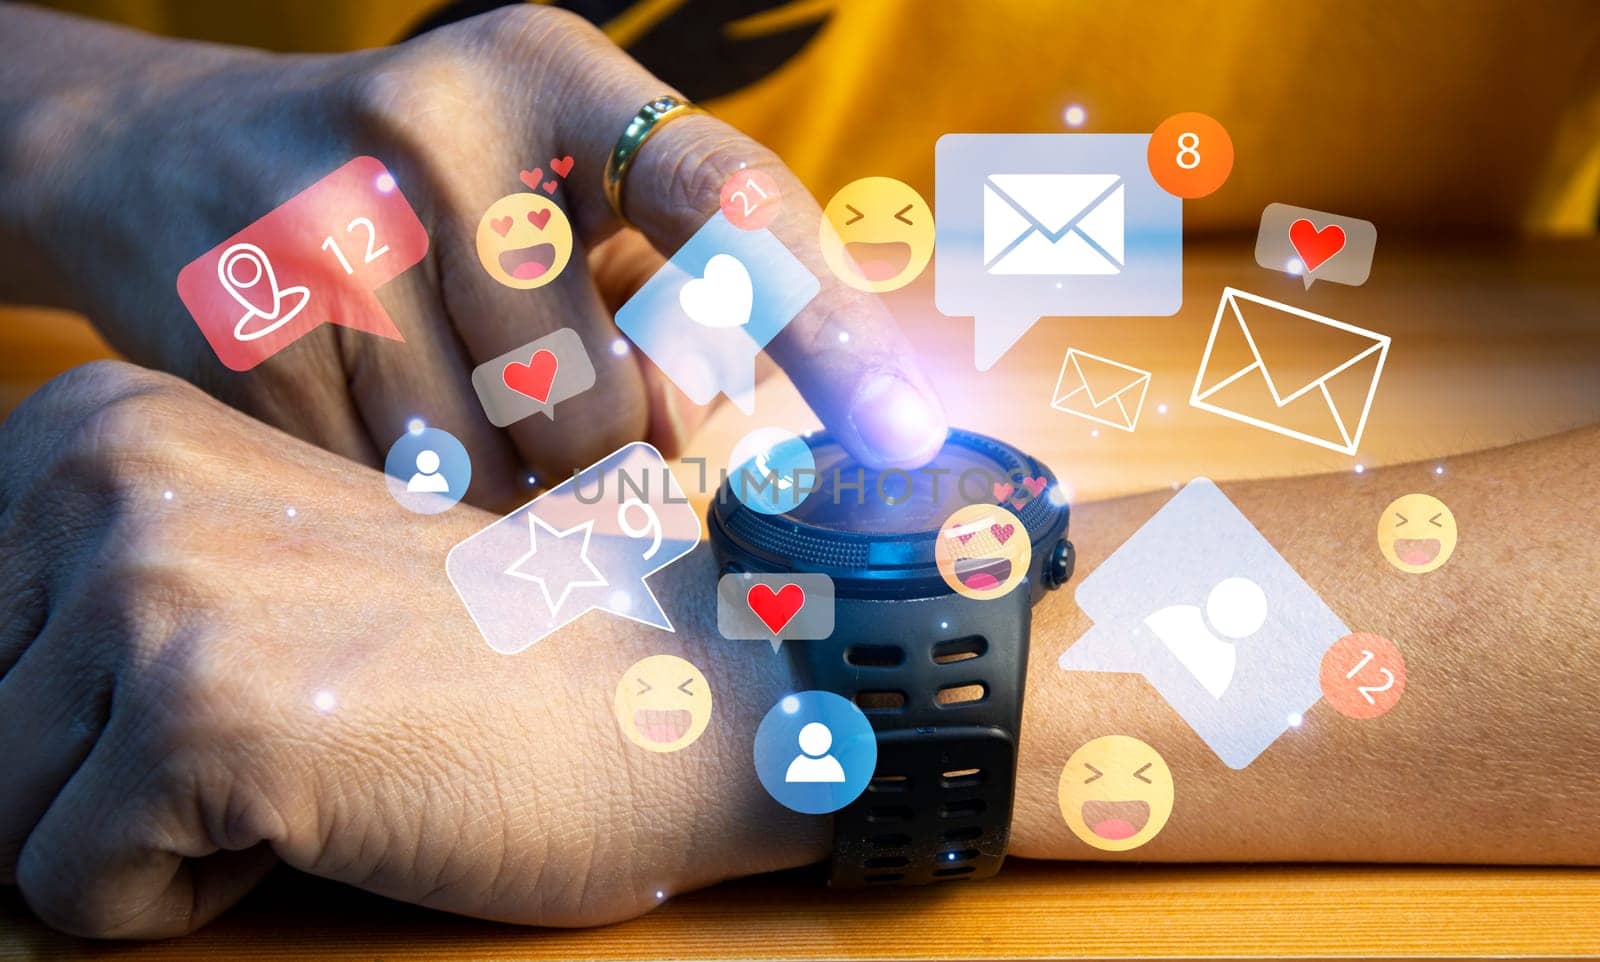 Use of social media and digital smartwatches The concept of living on vacation and playing social media. online marketing Connecting technology networks in global business